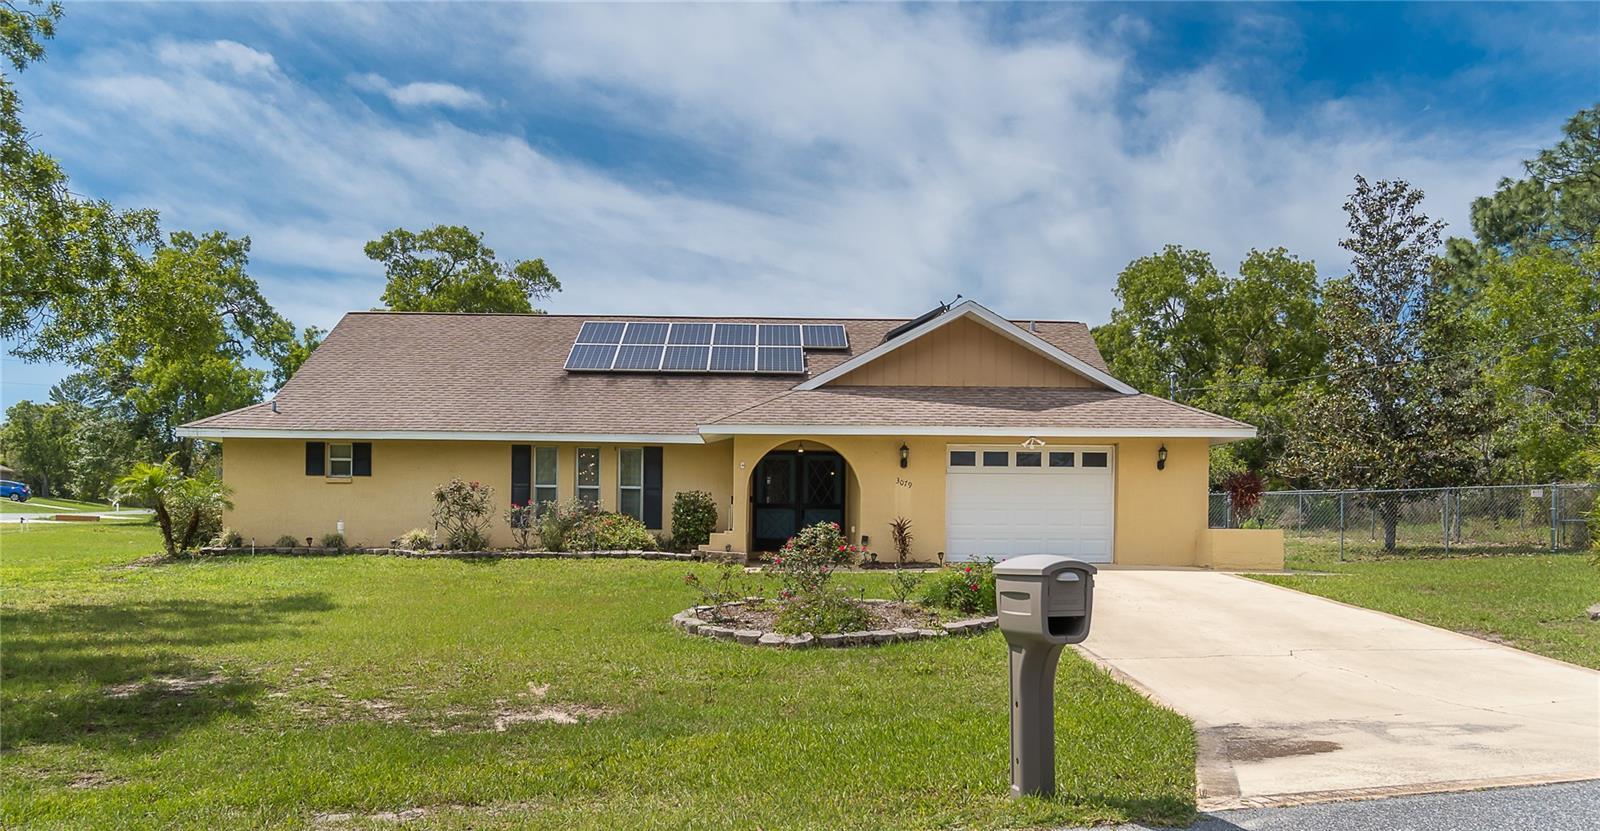 Photo one of 3079 Pintado Ave Spring Hill FL 34609 | MLS T3515909